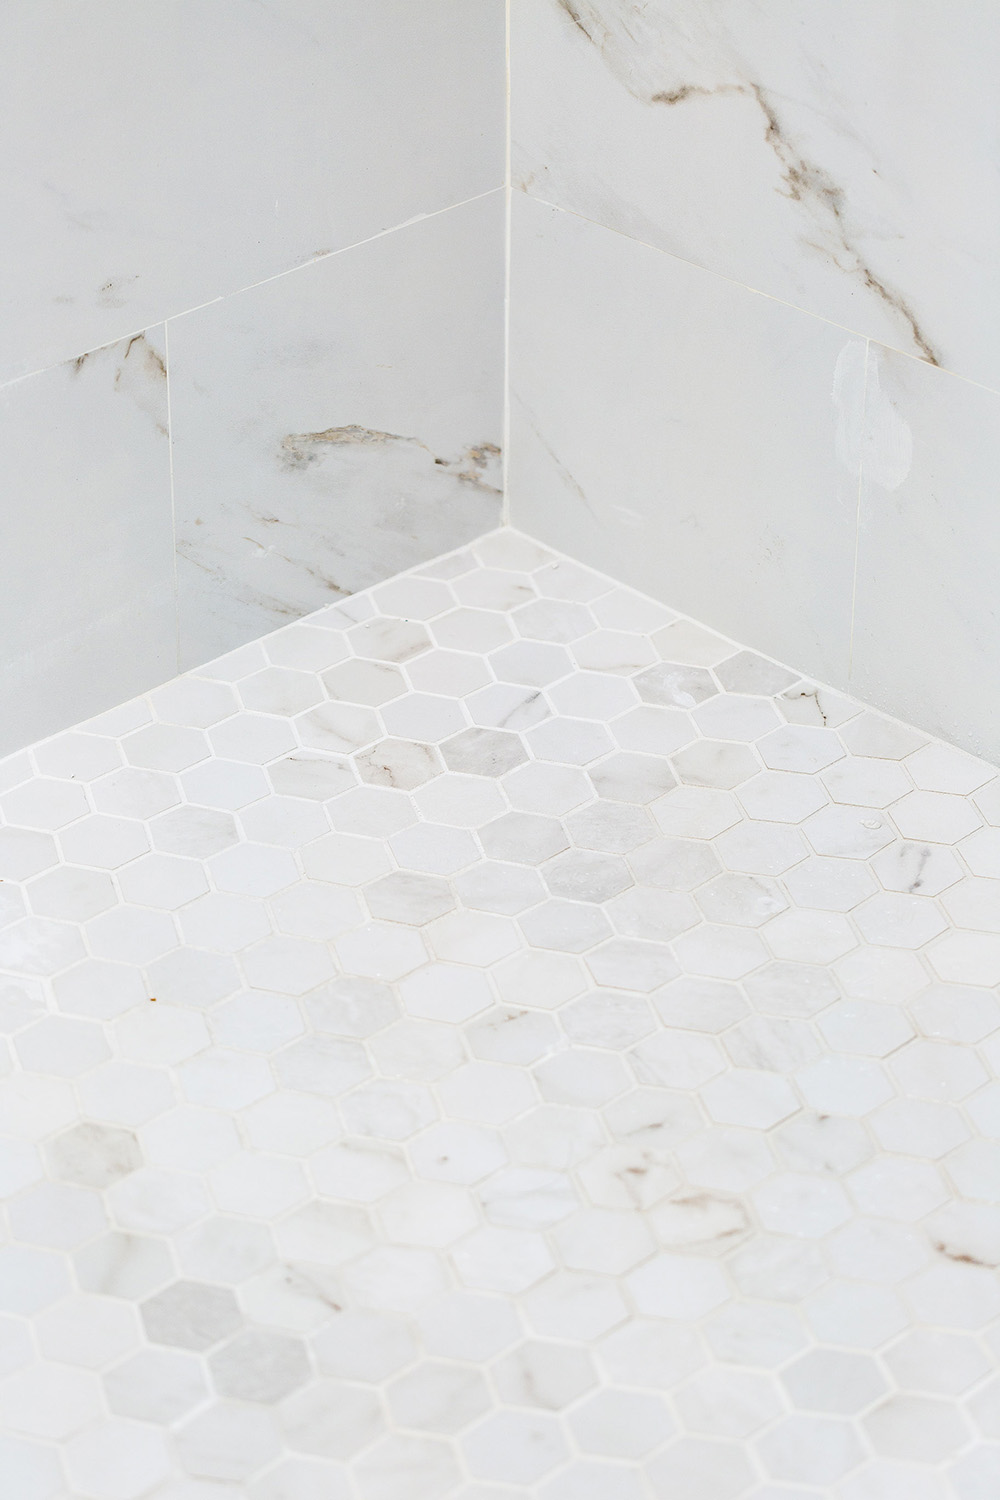 A shower floor with white hexagon tiles.